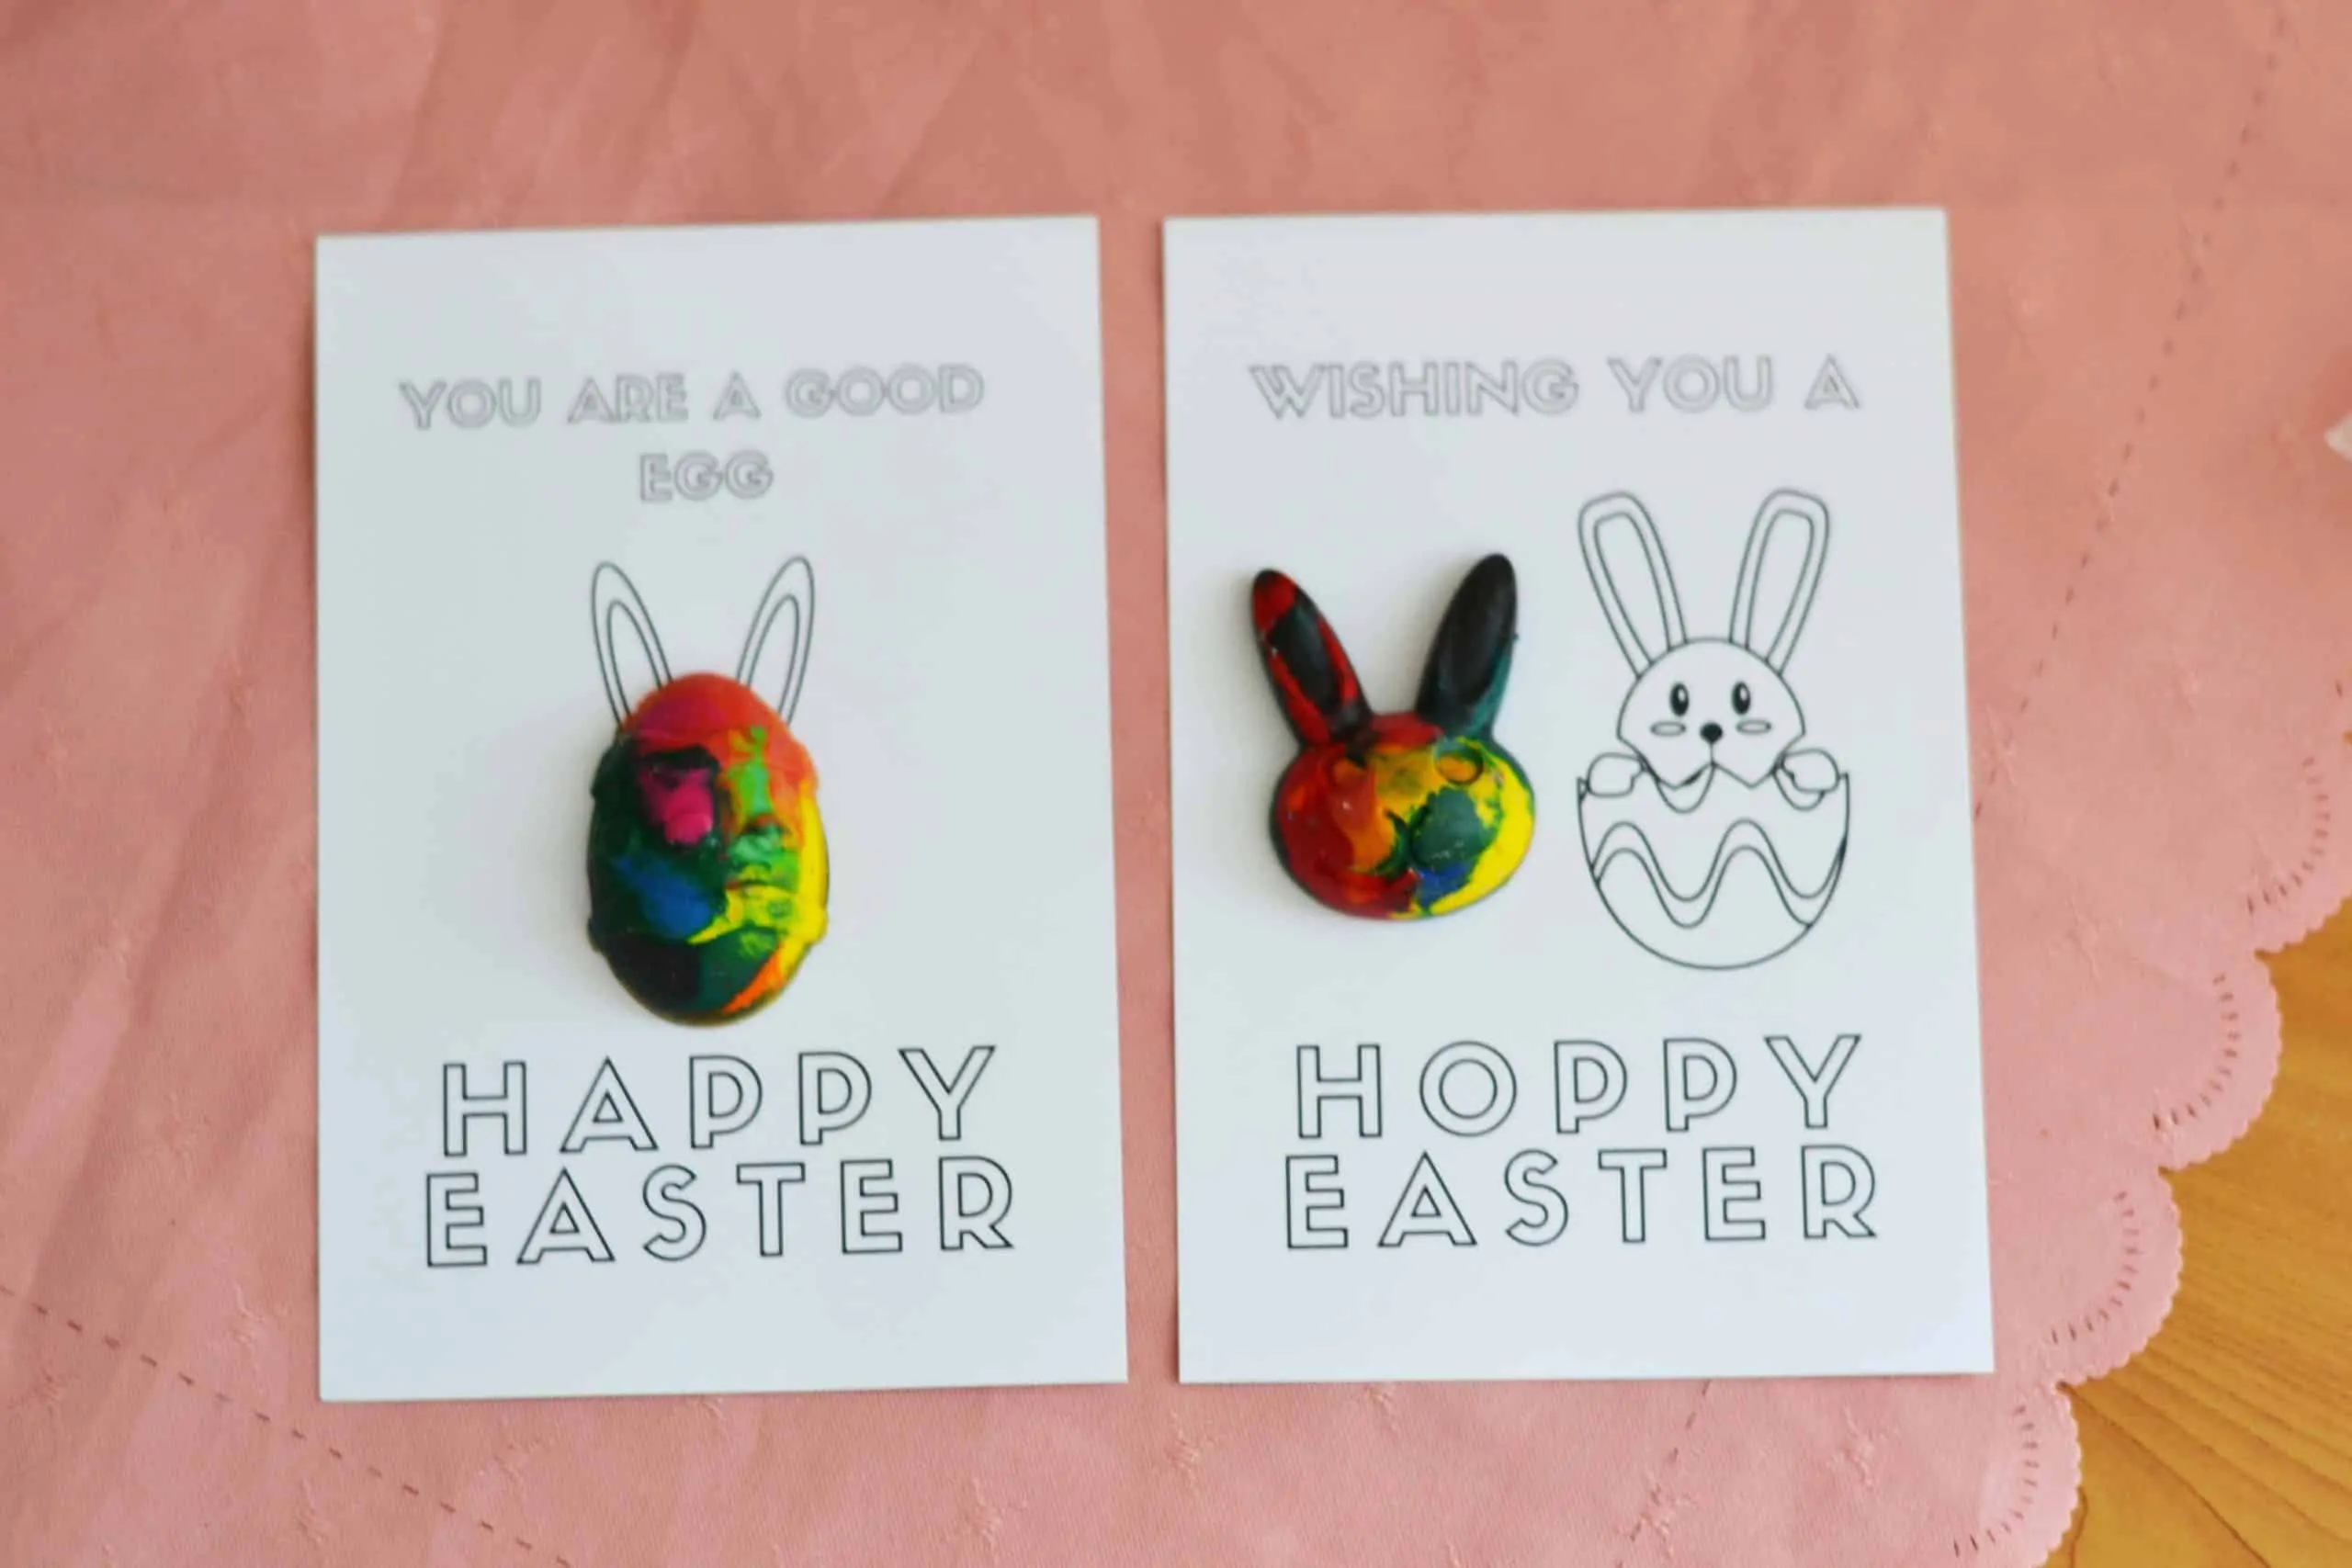 Printable easter cards with wishing you a hoppy easter and you are a good egg